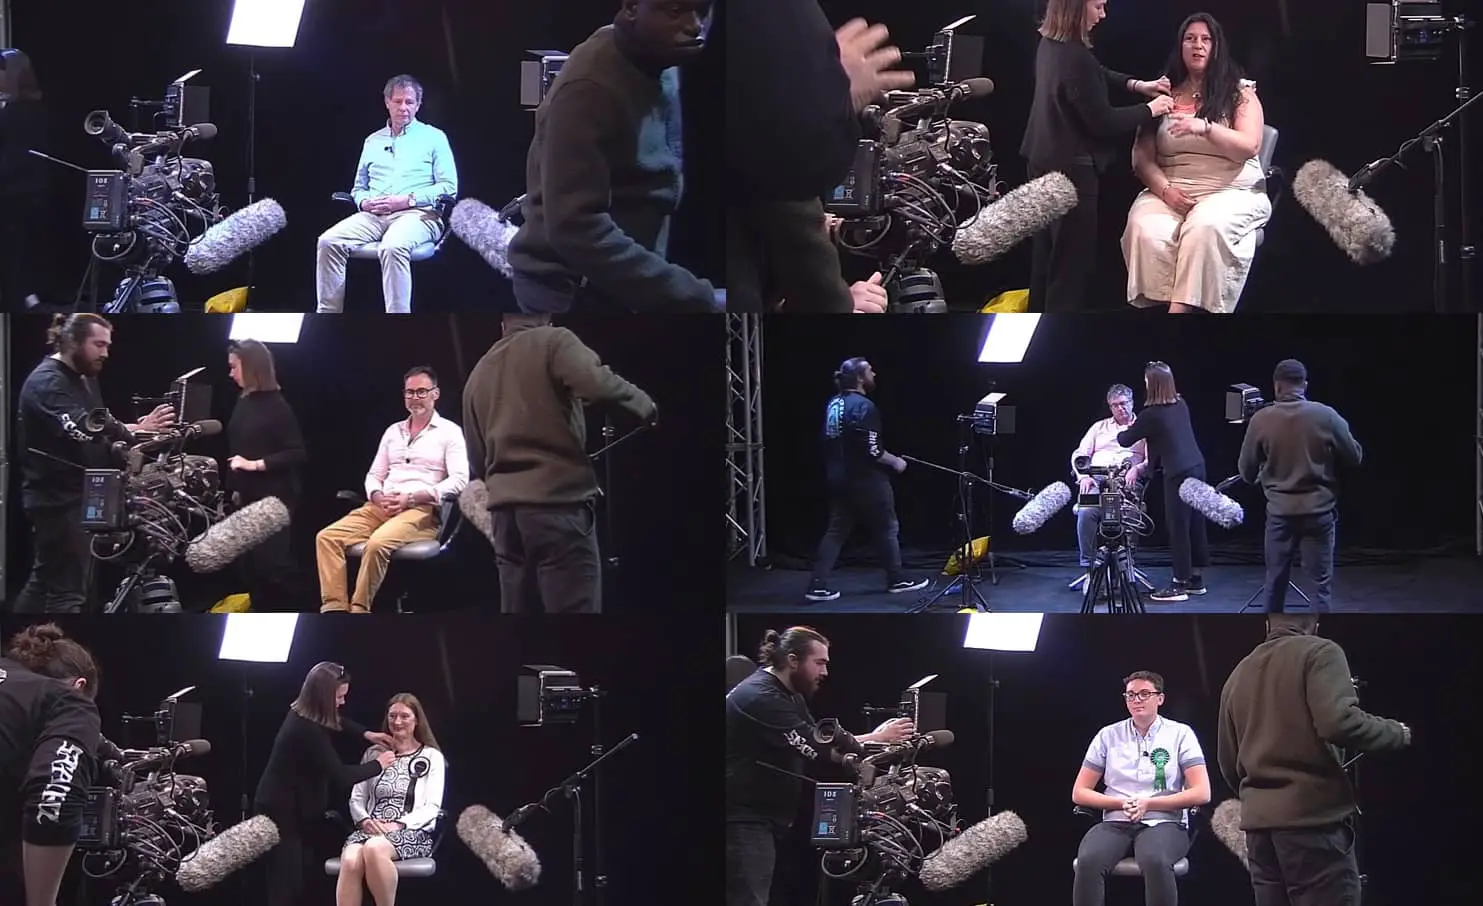 Photos from filming for election videos with candidates sitting in front of camera